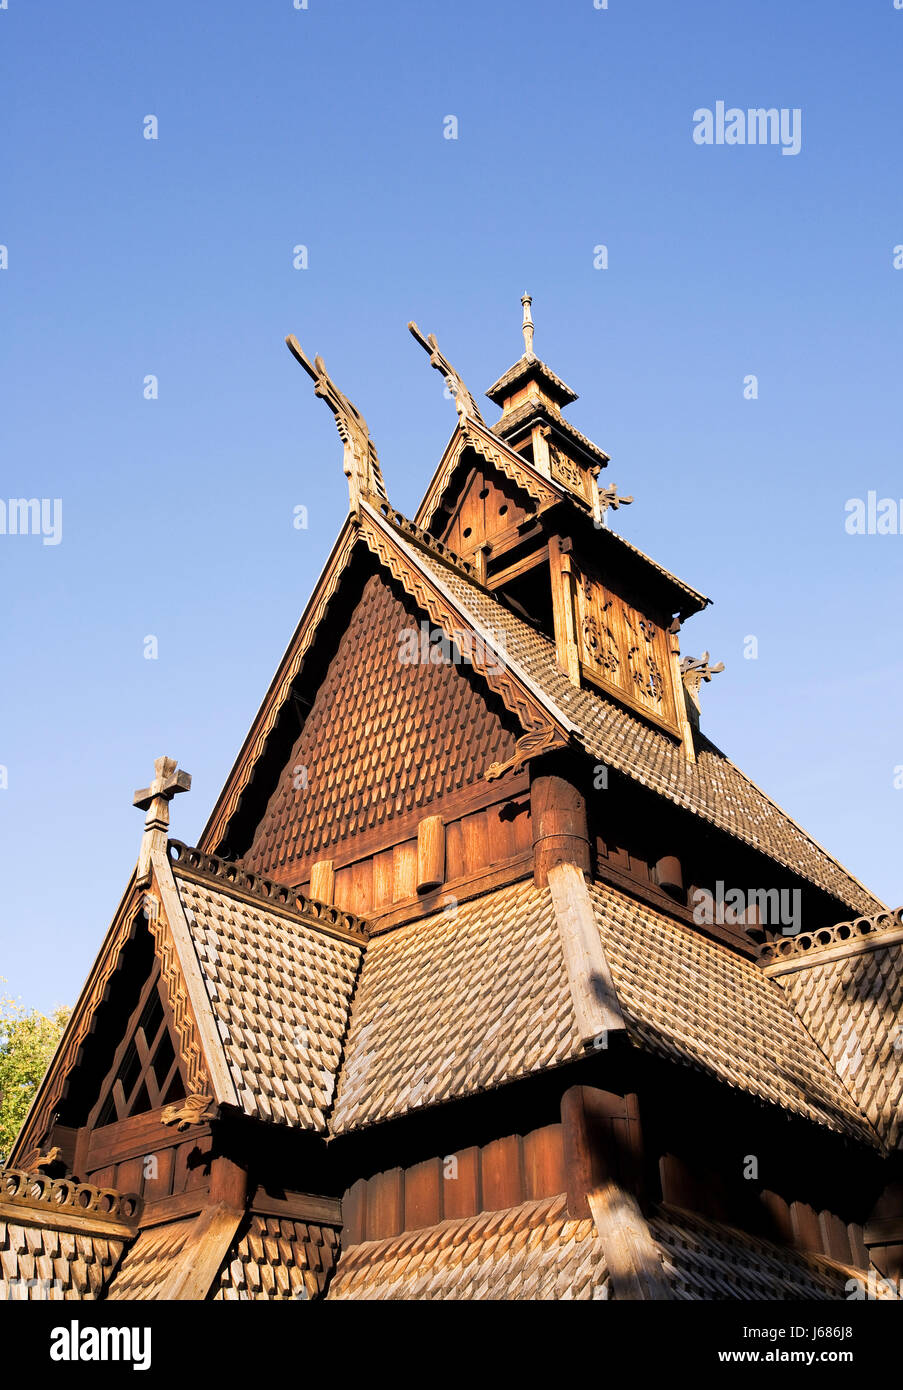 detail religion church temple wood europe norway style of construction Stock Photo